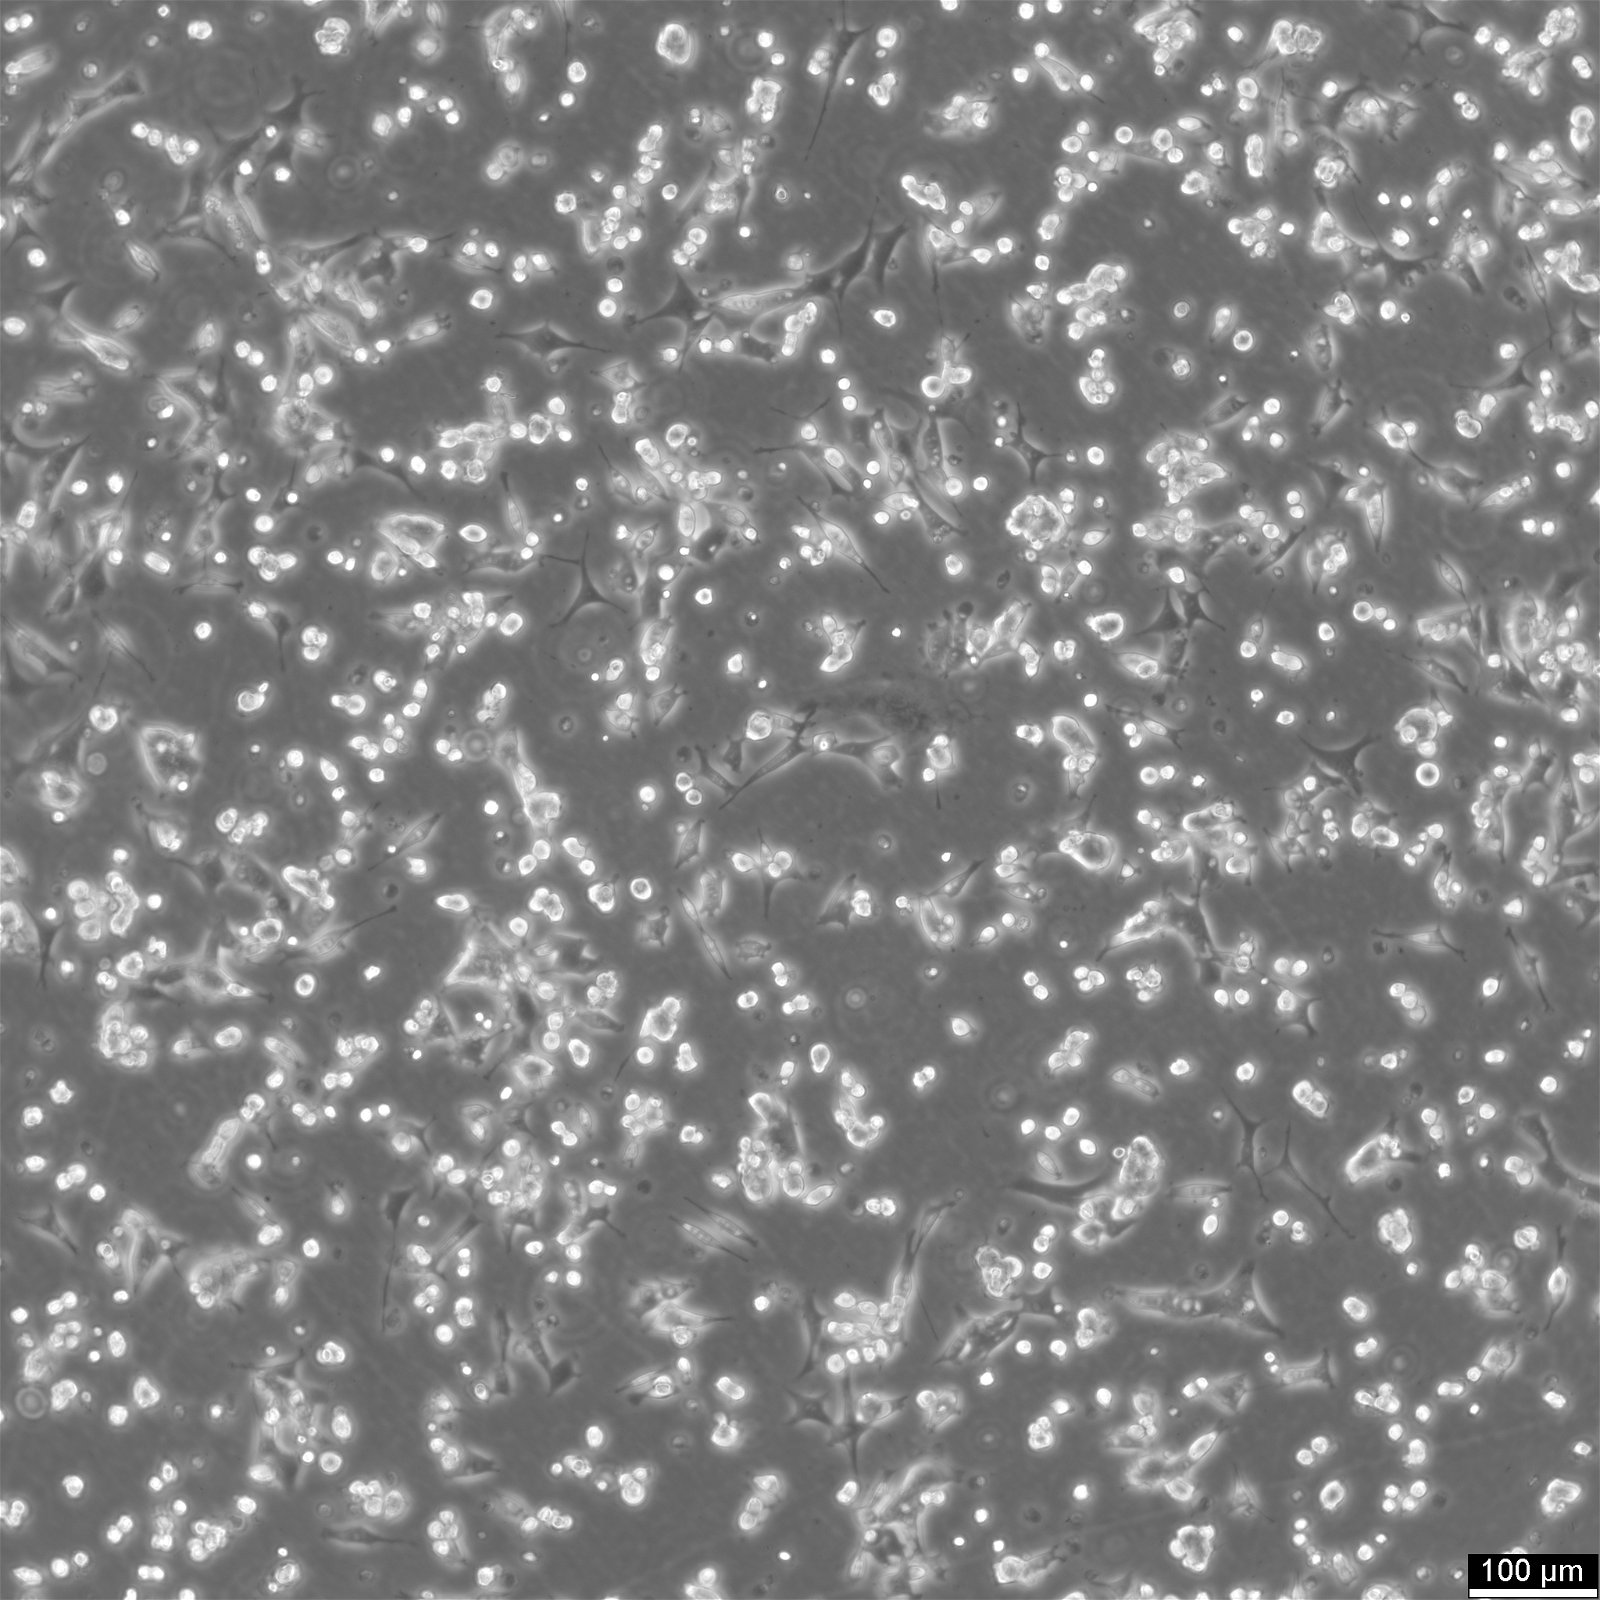 SV40 MES 13 Cells